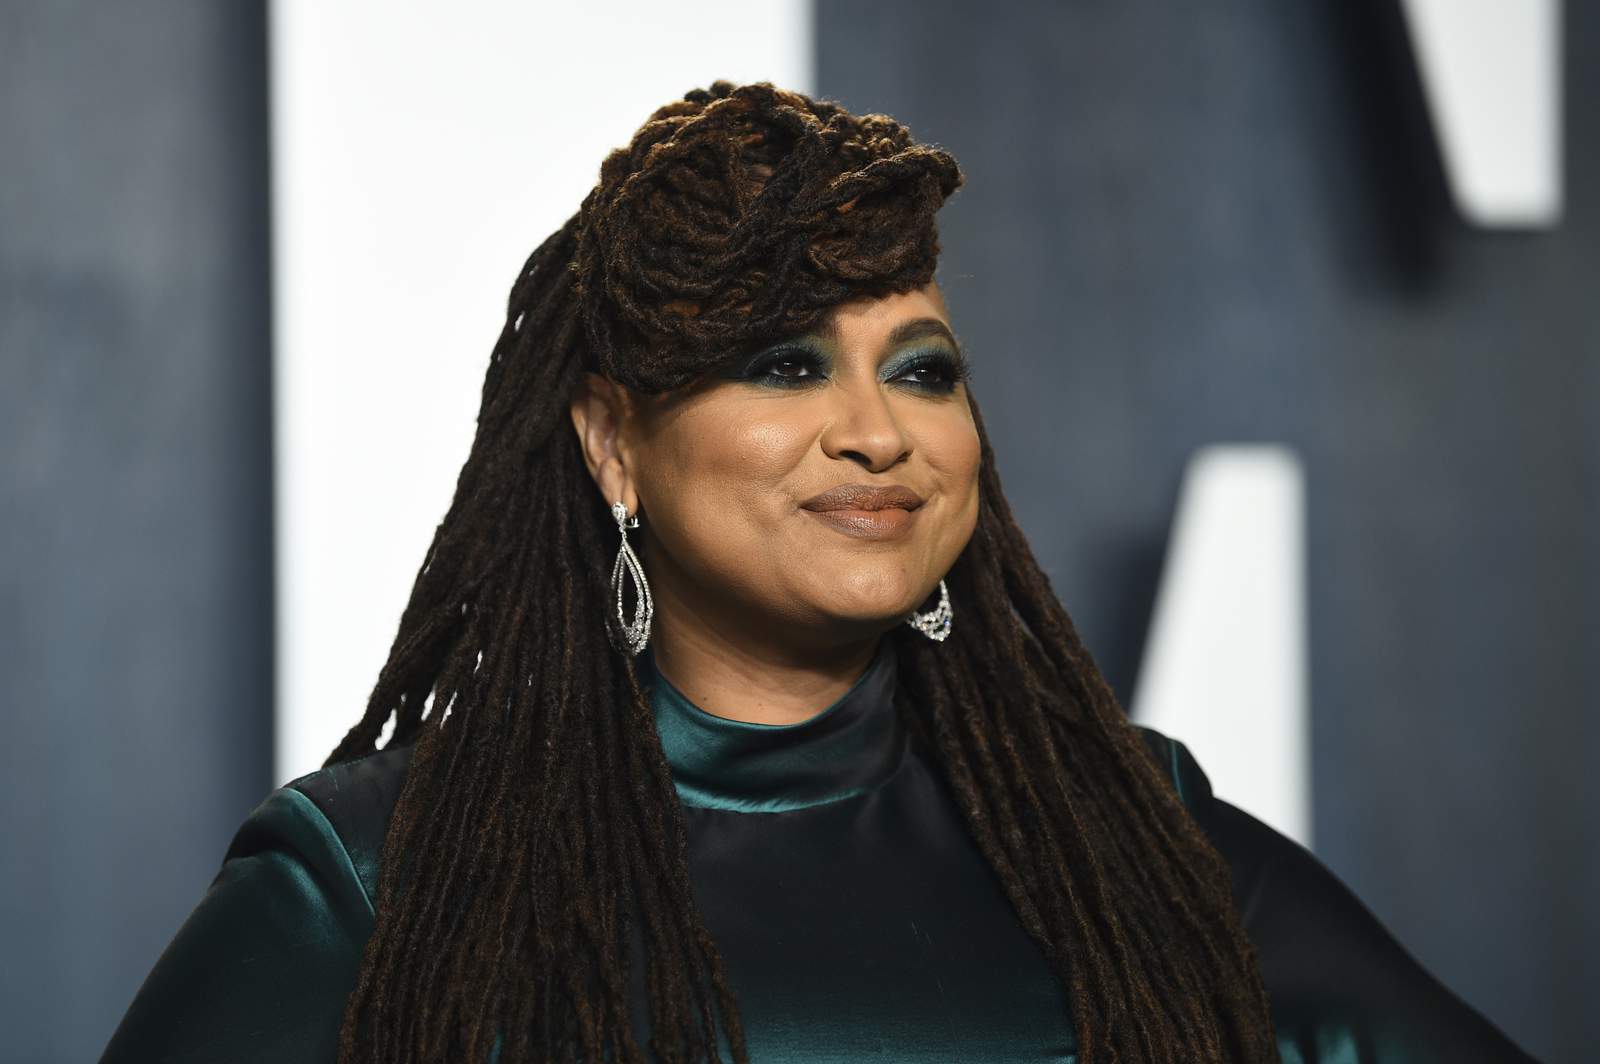 Ava DuVernay, her company honored by MacDowell artist colony